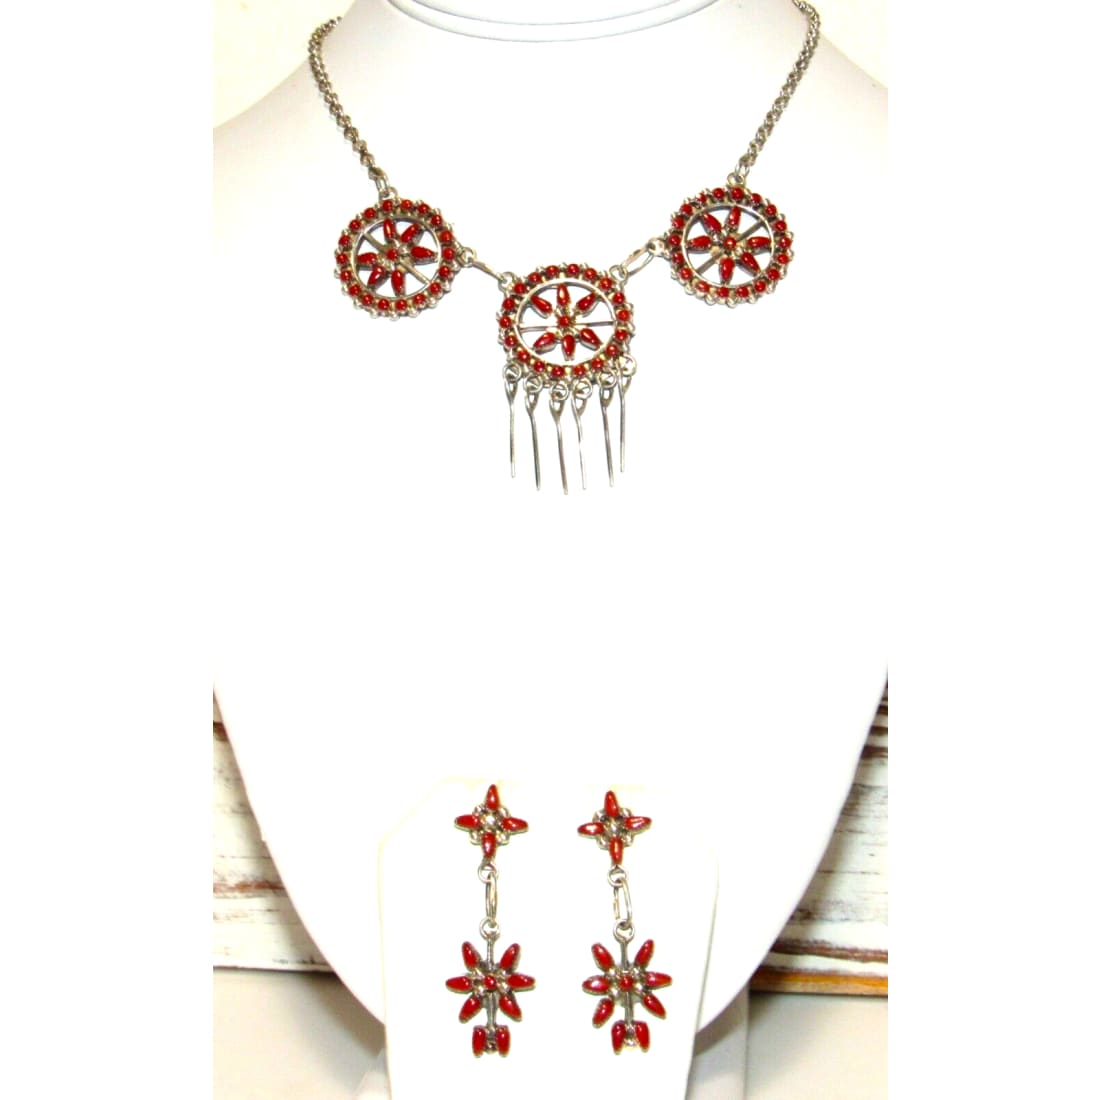 VTG Zuni Coral Necklace and Earrings Set Sterling Silver 